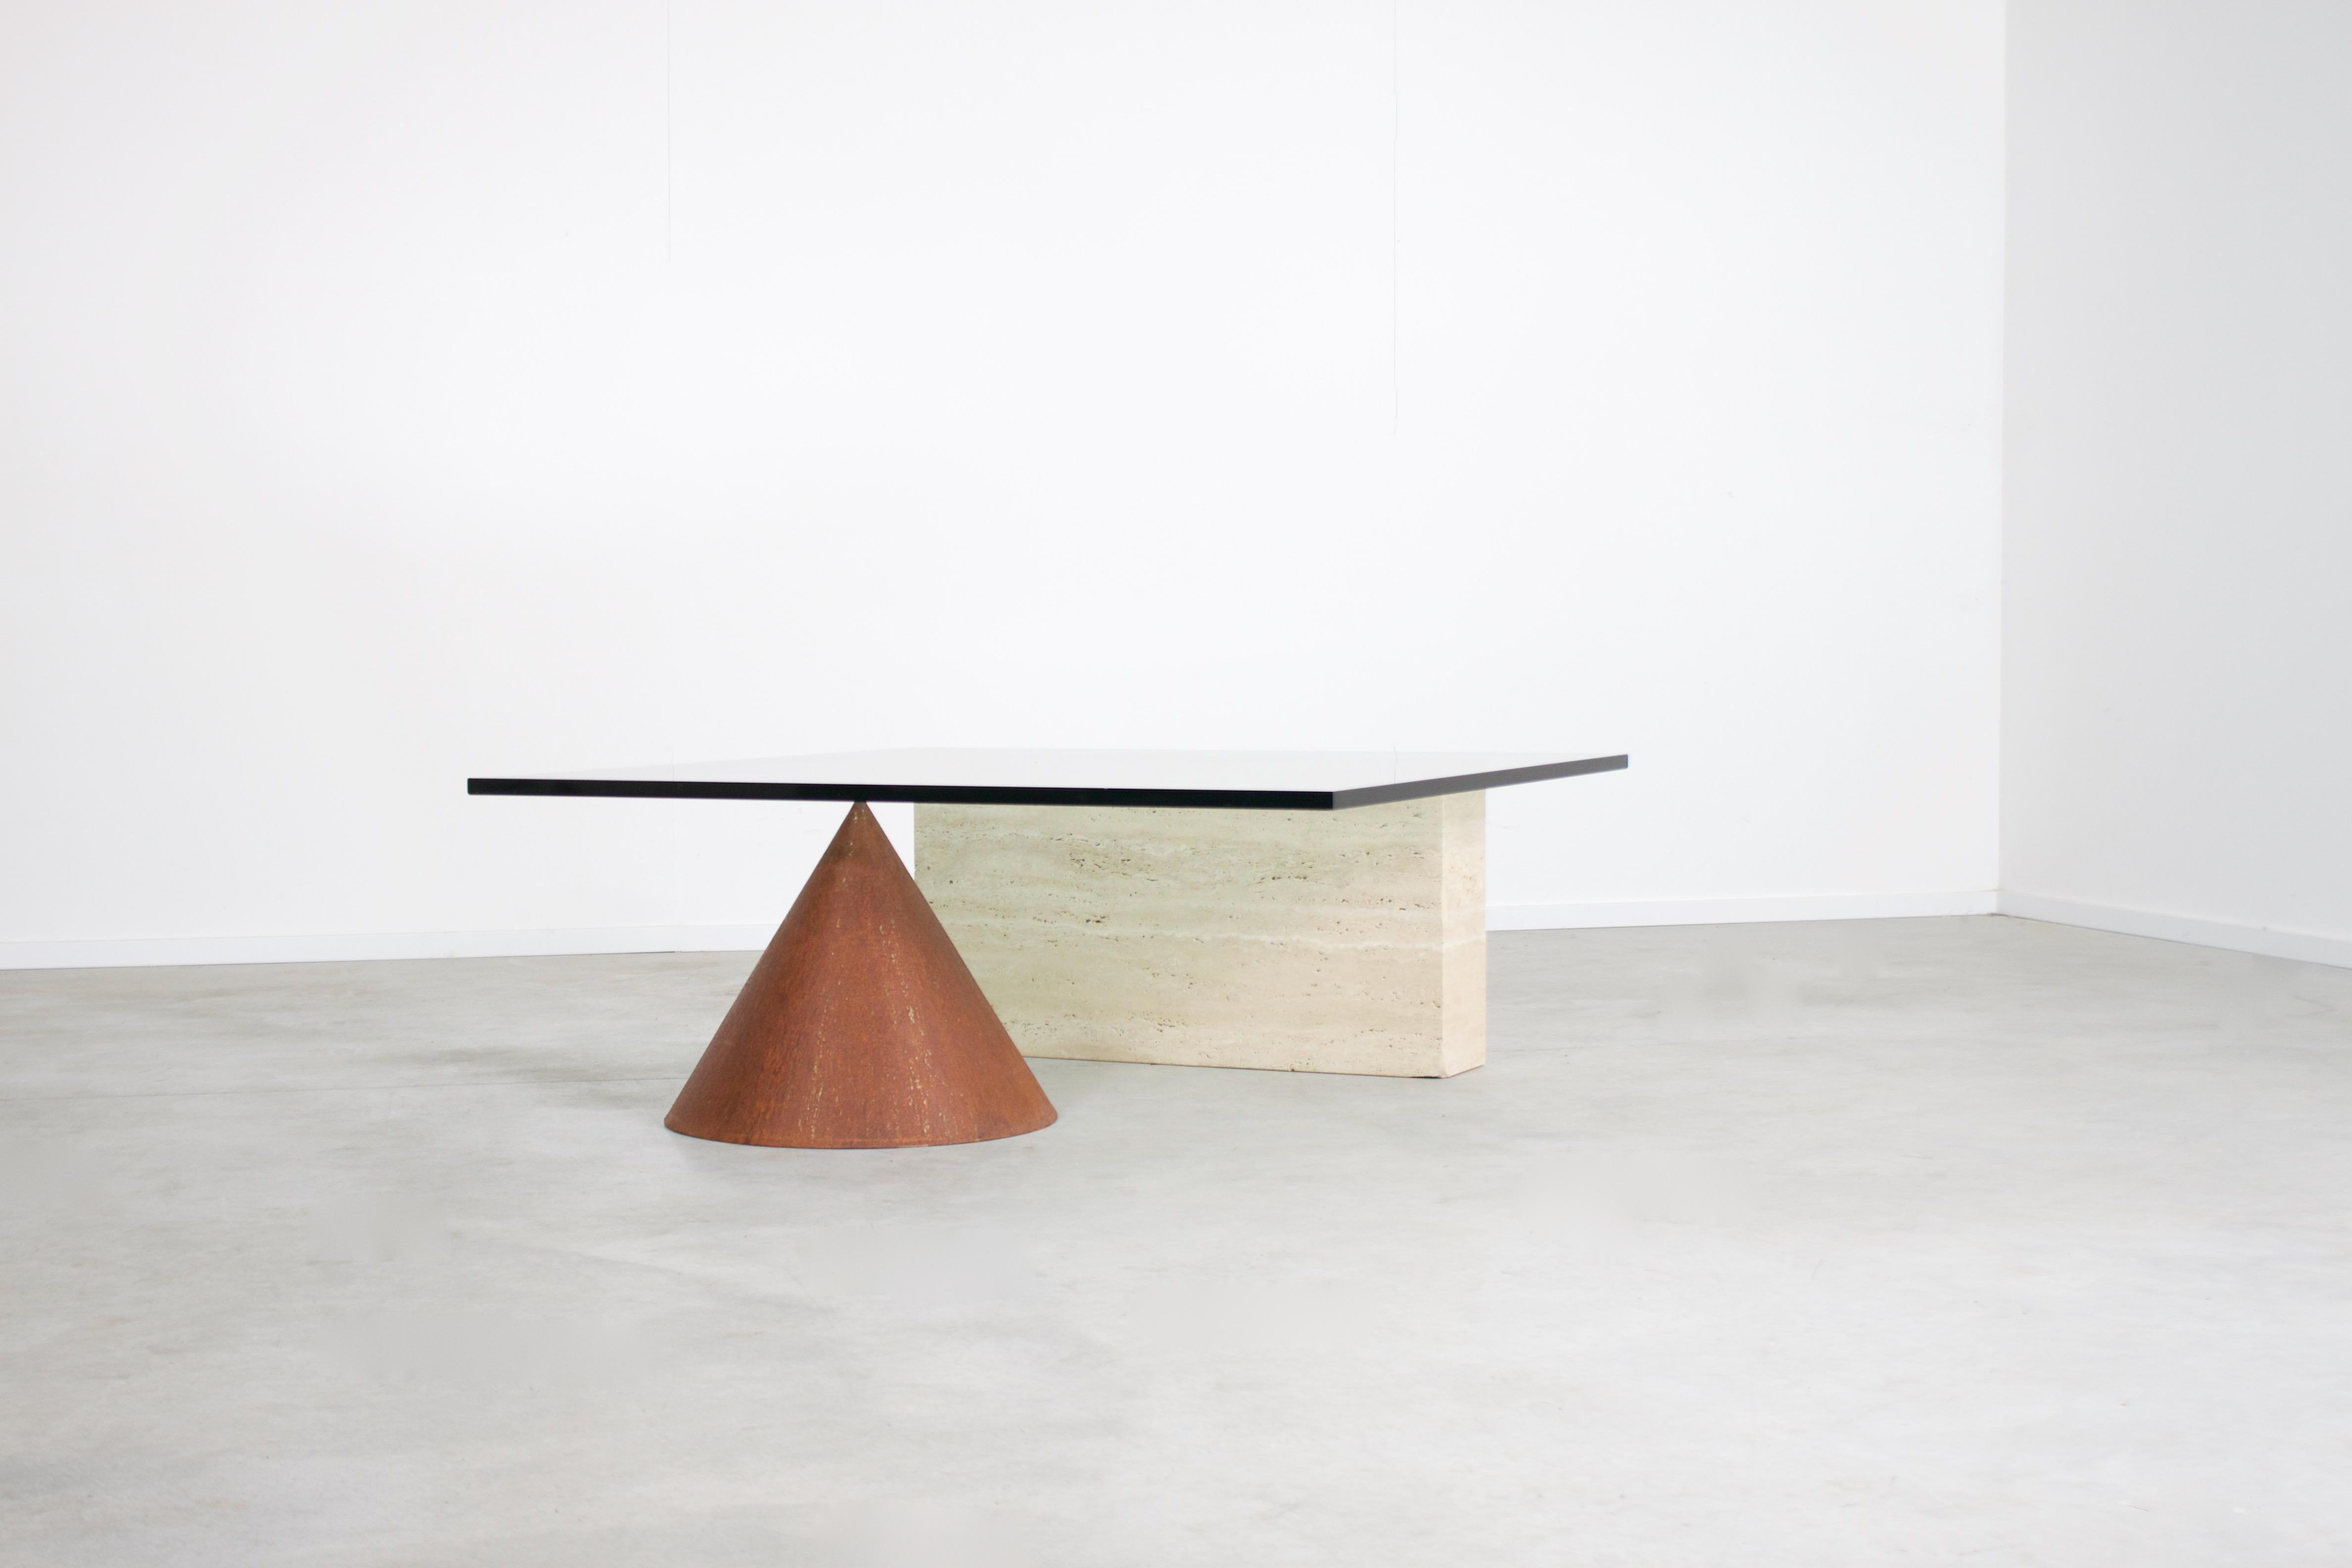 Sculptural Kono coffee table in very good condition.

Designed by Lella & Massimo Vignelli in the 1970s 

Manufactured by Casigliani, Italy

The Kono table consists of a combination of materials and forms.

The thick glass top is resting on a cone